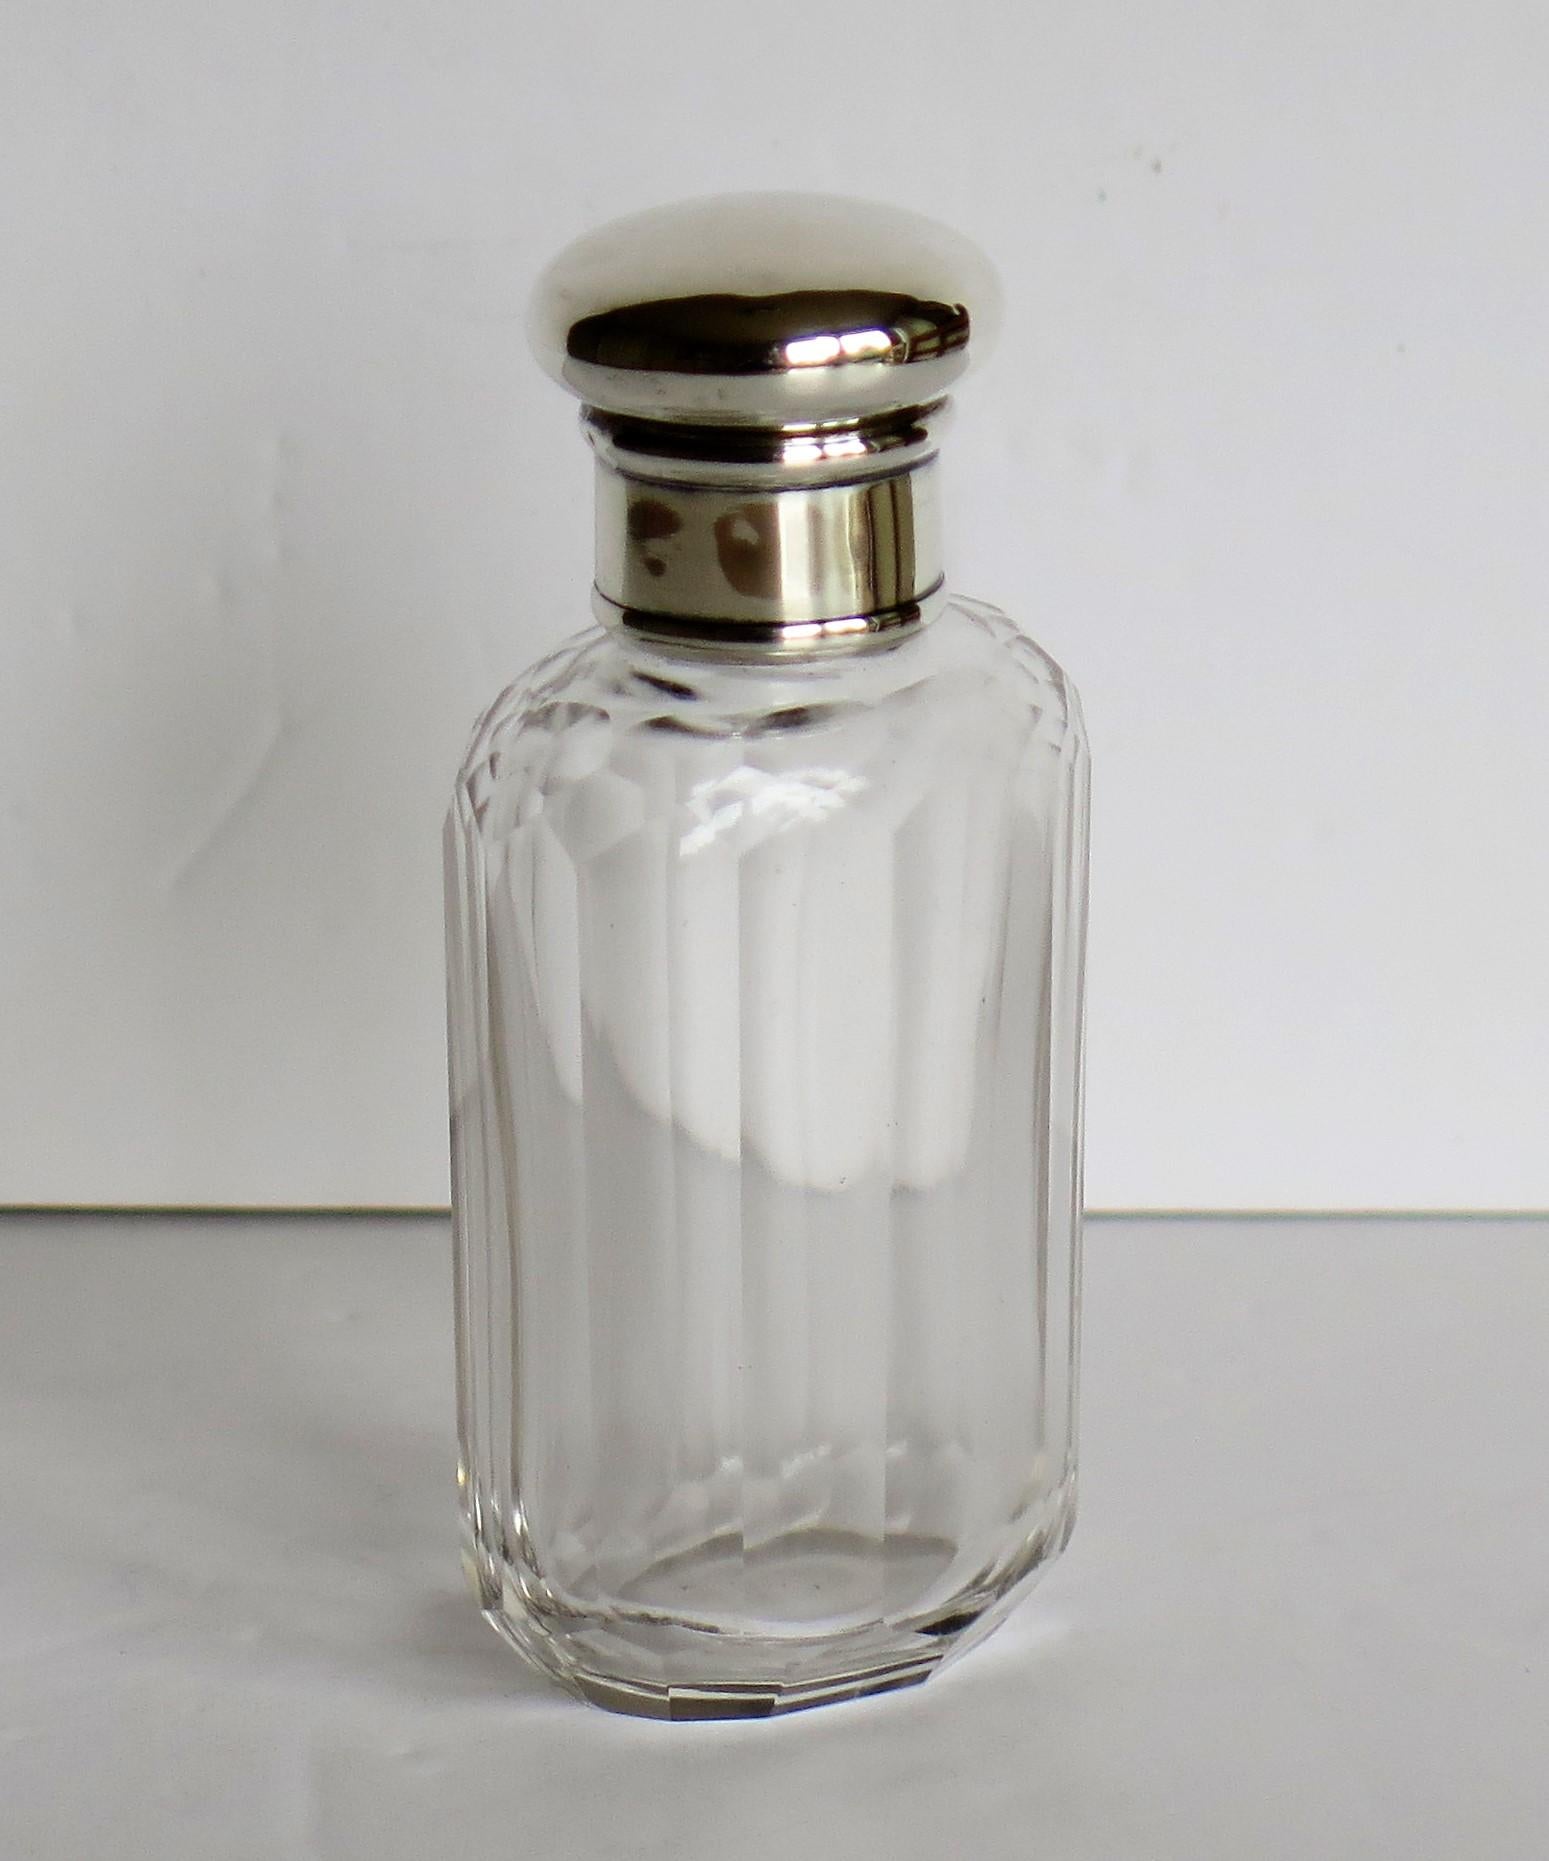 English Crystal Glass Cologne or Perfume Bottle with Sterling Silver Top, London, 1926